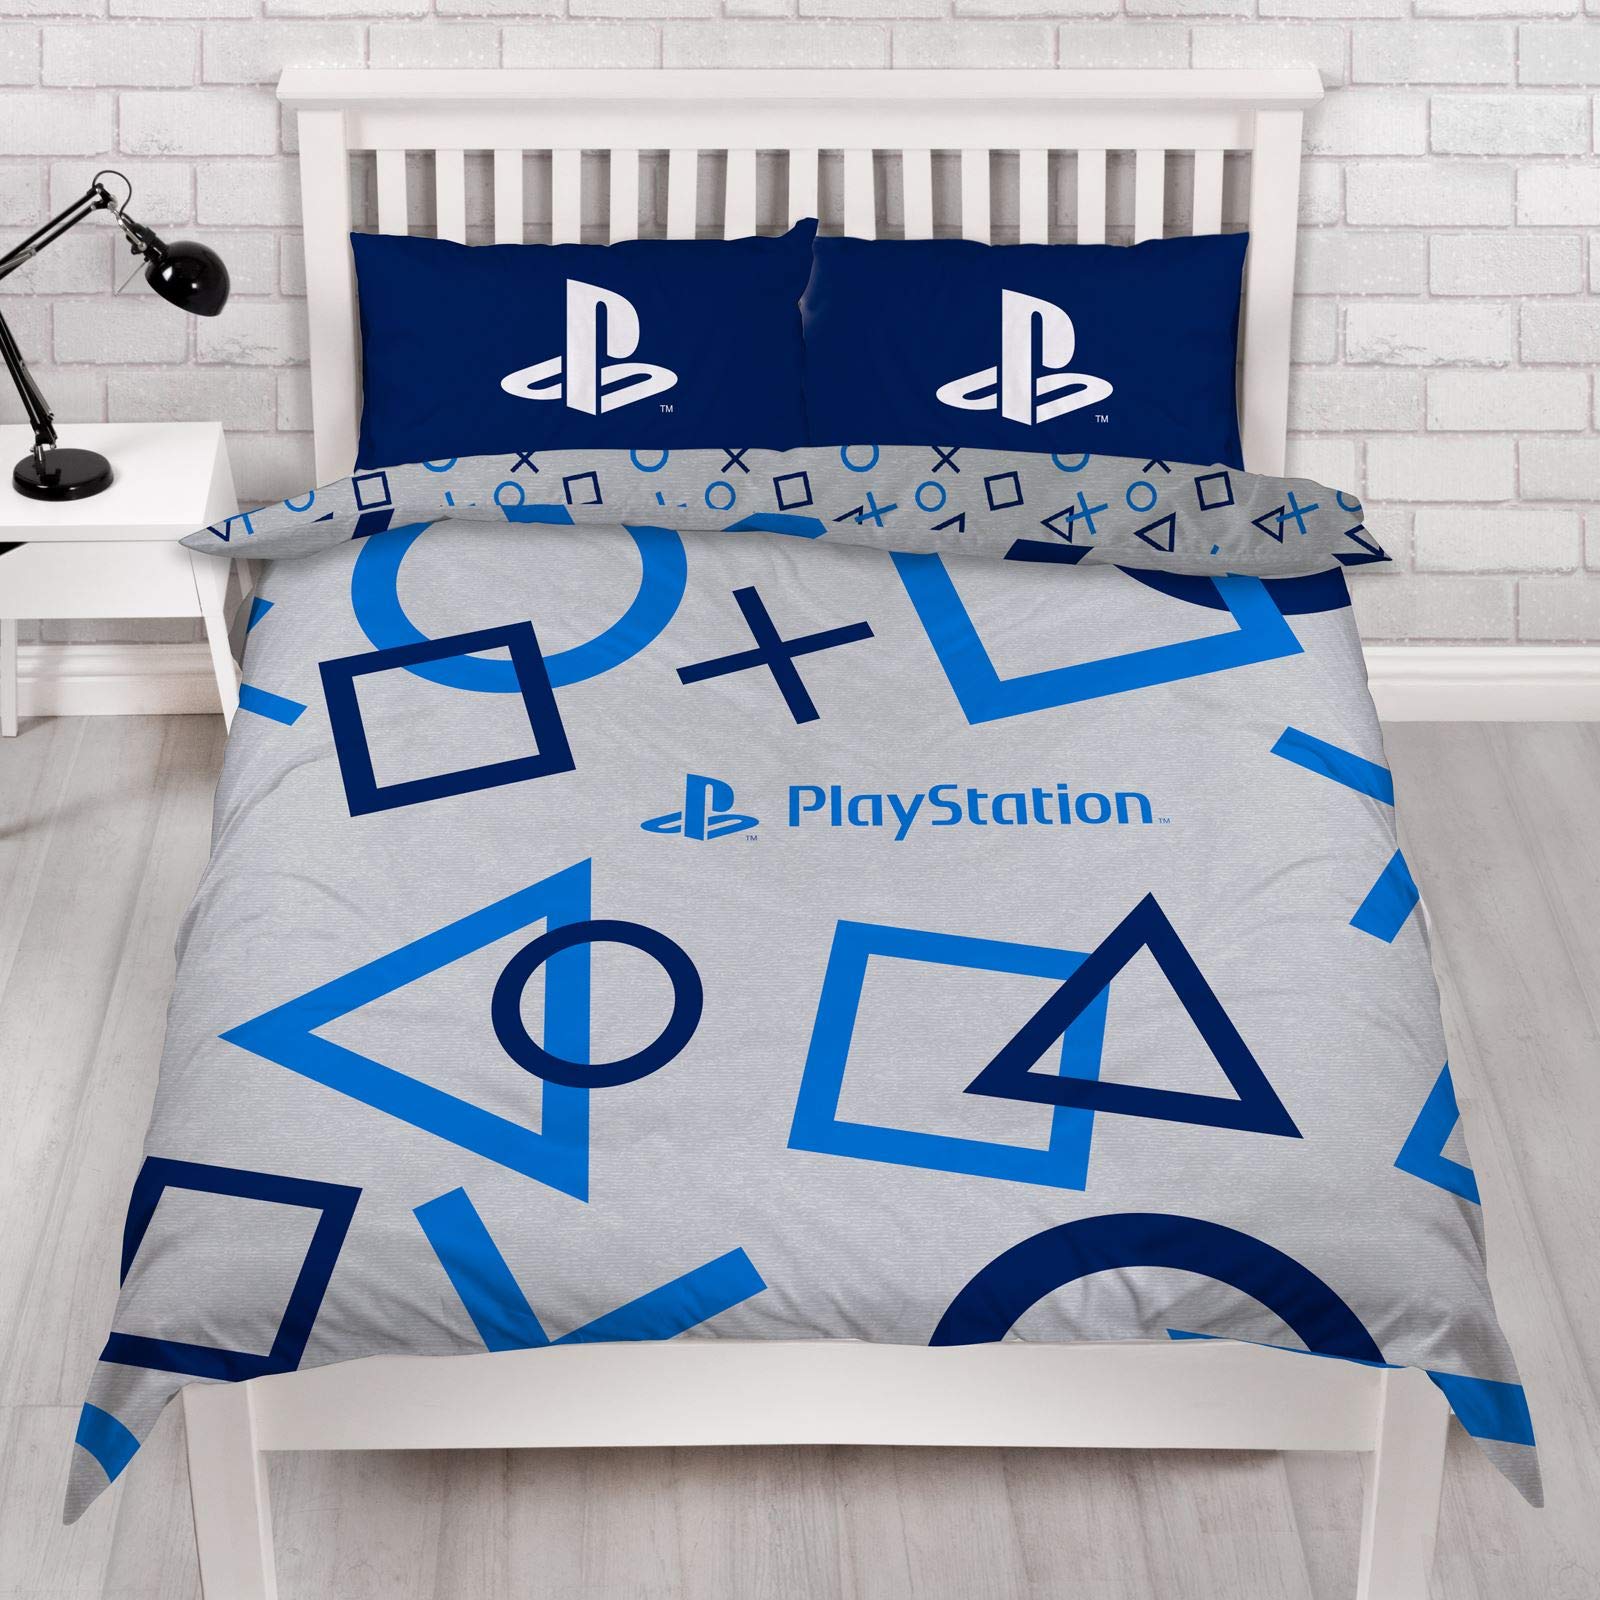 Character World Playstation Blue Double Duvet Cover Officially Licensed Sony Playstation Reversible Two Sided Gaming Bedding Design with Matching Pillowcase, Polycotton, Blue, PYSBLEDD001UK2